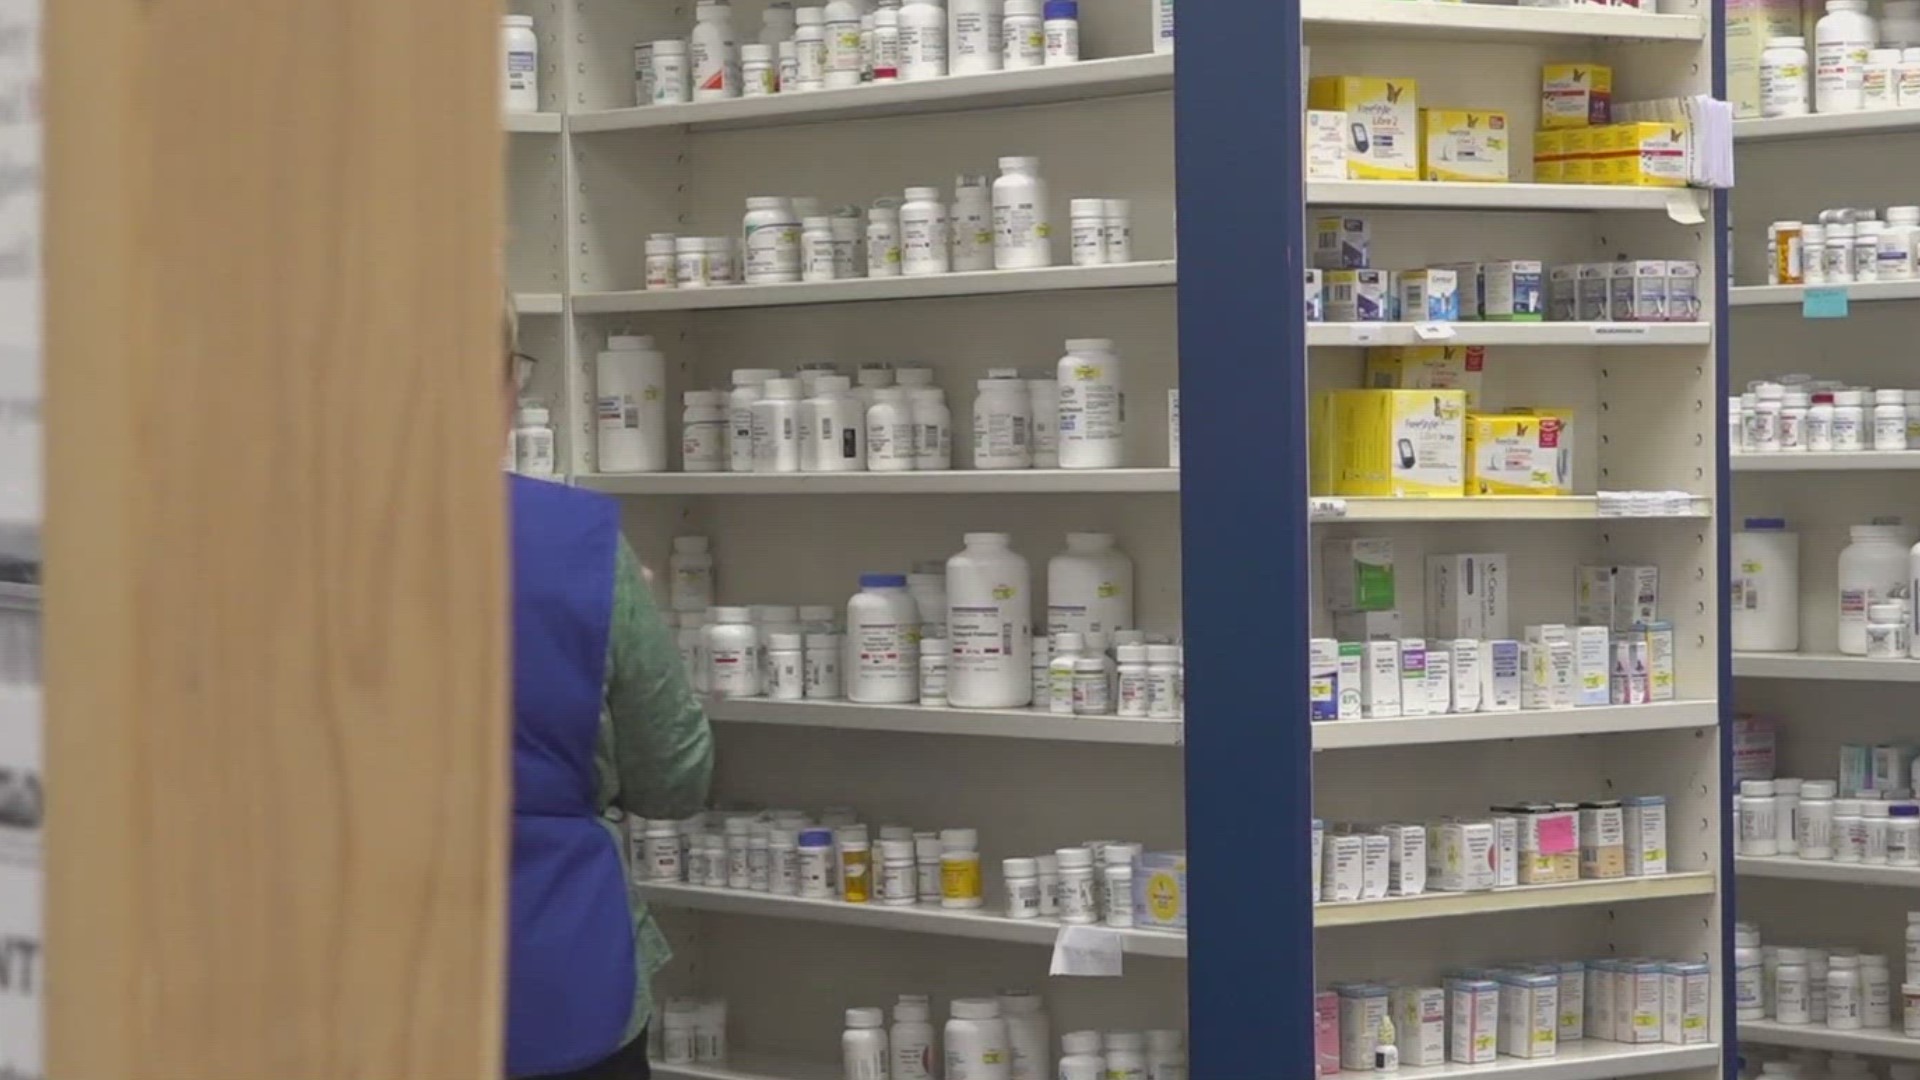 Mahaska Drug in Oskaloosa is one of the many independent pharmacies struggling to make a profit. "We're losing money," said co-owner John Nicholson.